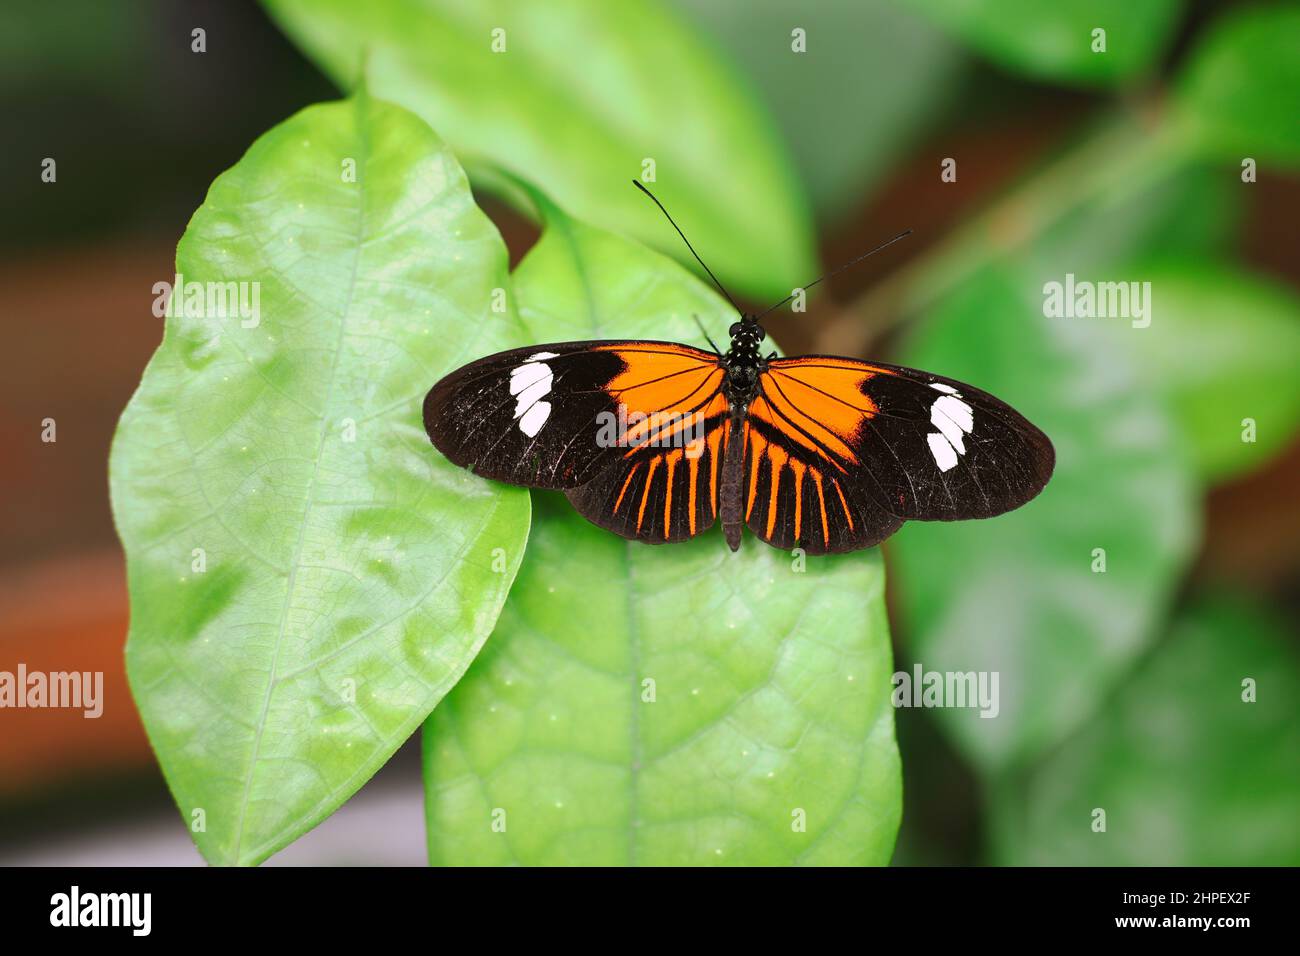 Dorsal View of Postman Butterfly on Green Leaf. Neotropical Insect Common Postman (Heliconius Melpomene). Stock Photo